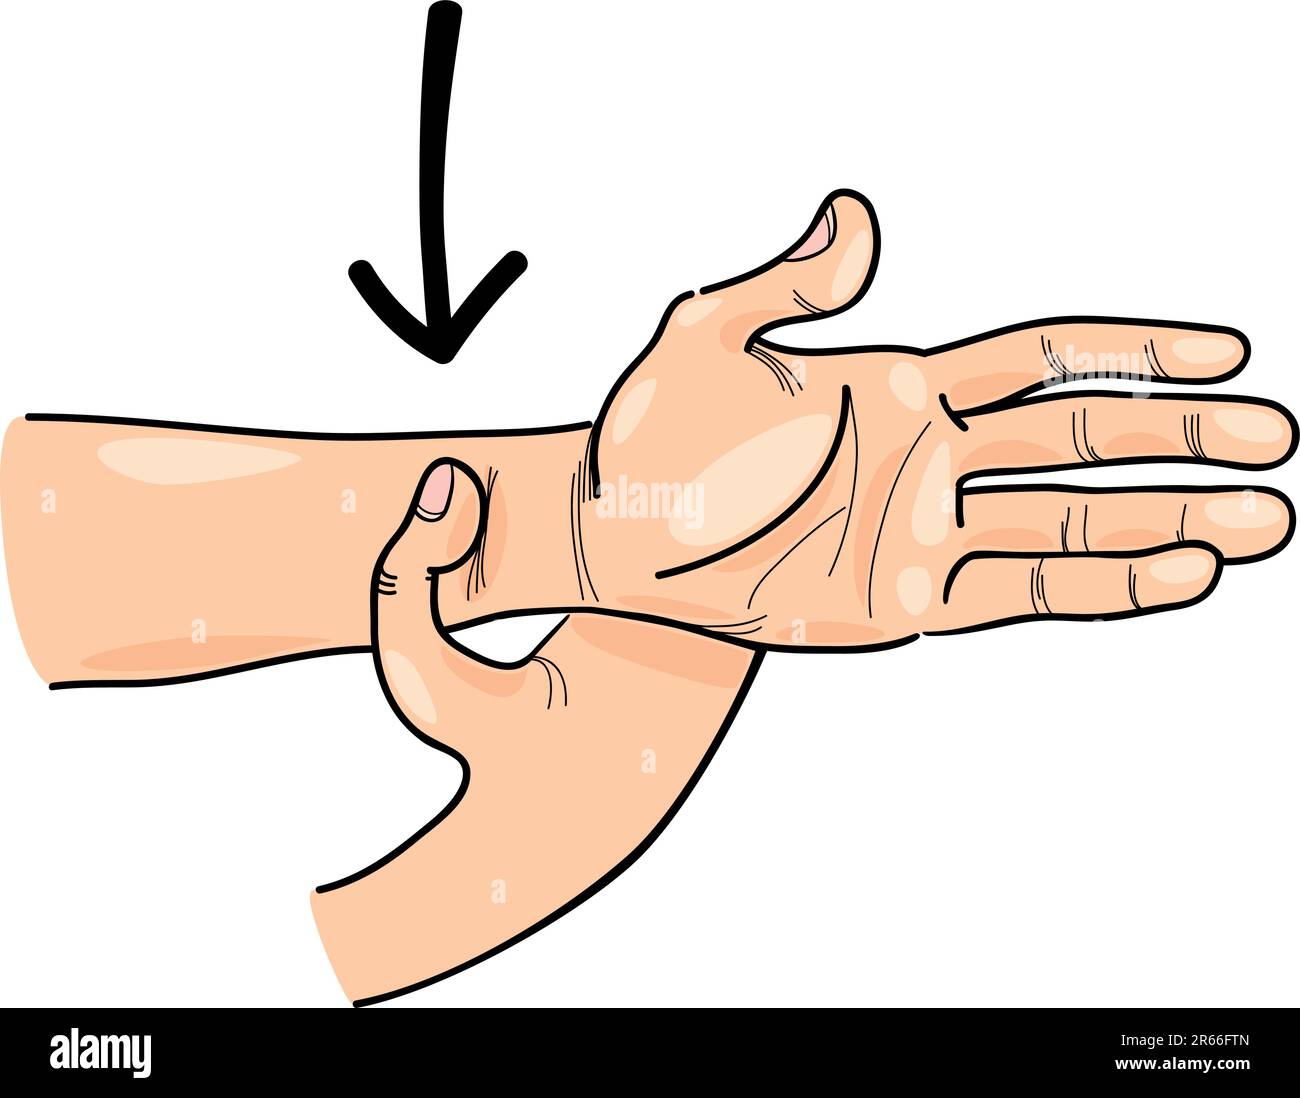 Illustration of special acupressure point on hand Stock Vector